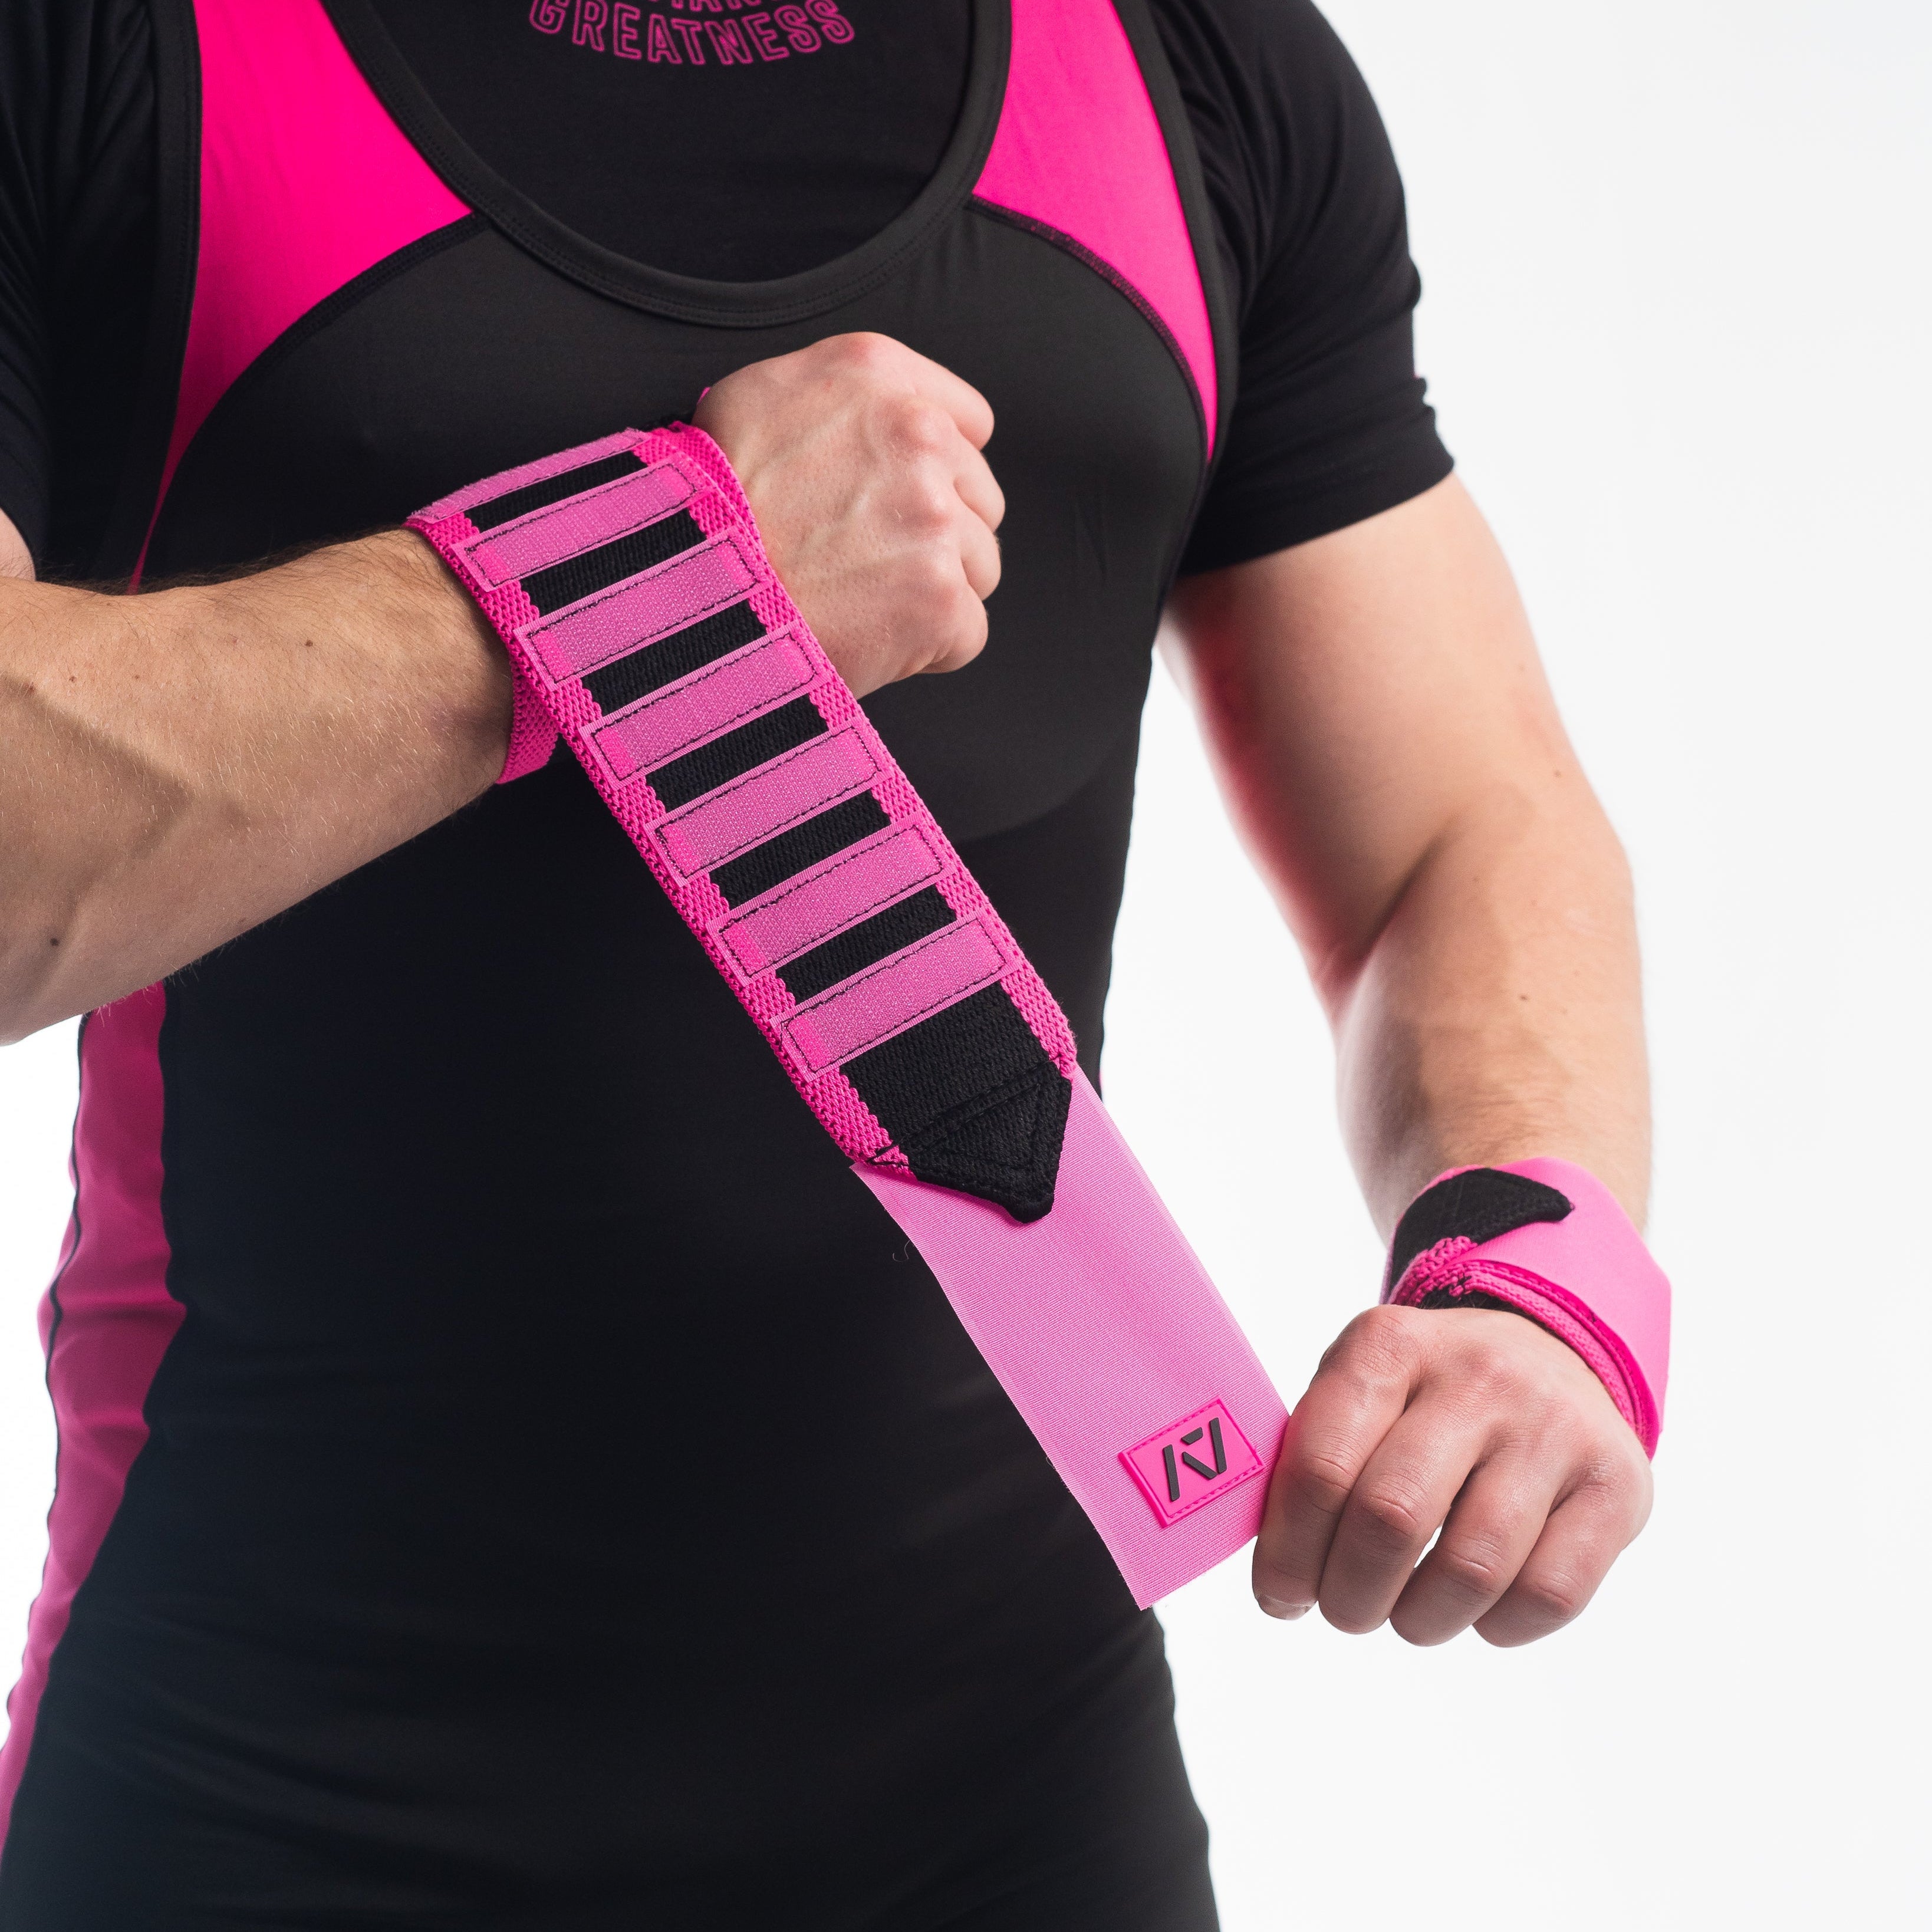 A7 IPF Approved Zebra Wraps feature strips of velcro on the wraps, allowing Zebra Wraps to conform fully to your unique preference of tightness. We offer Zebra wrist wraps in 3 lengths and 4 stiffnesses (Flexi, Mids, Stiff, and Rigor Mortis). The IPF Approved Kit includes Powerlifting Singlet, A7 Meet Shirt, A7 Deadlift Socks, Hourglass Knee Sleeves (Stiff Knee Sleeves and Rigor Mortis Knee Sleeves). Genouillères powerlifting shipping to France, Spain, Ireland, Germany, Italy, Sweden and EU. 